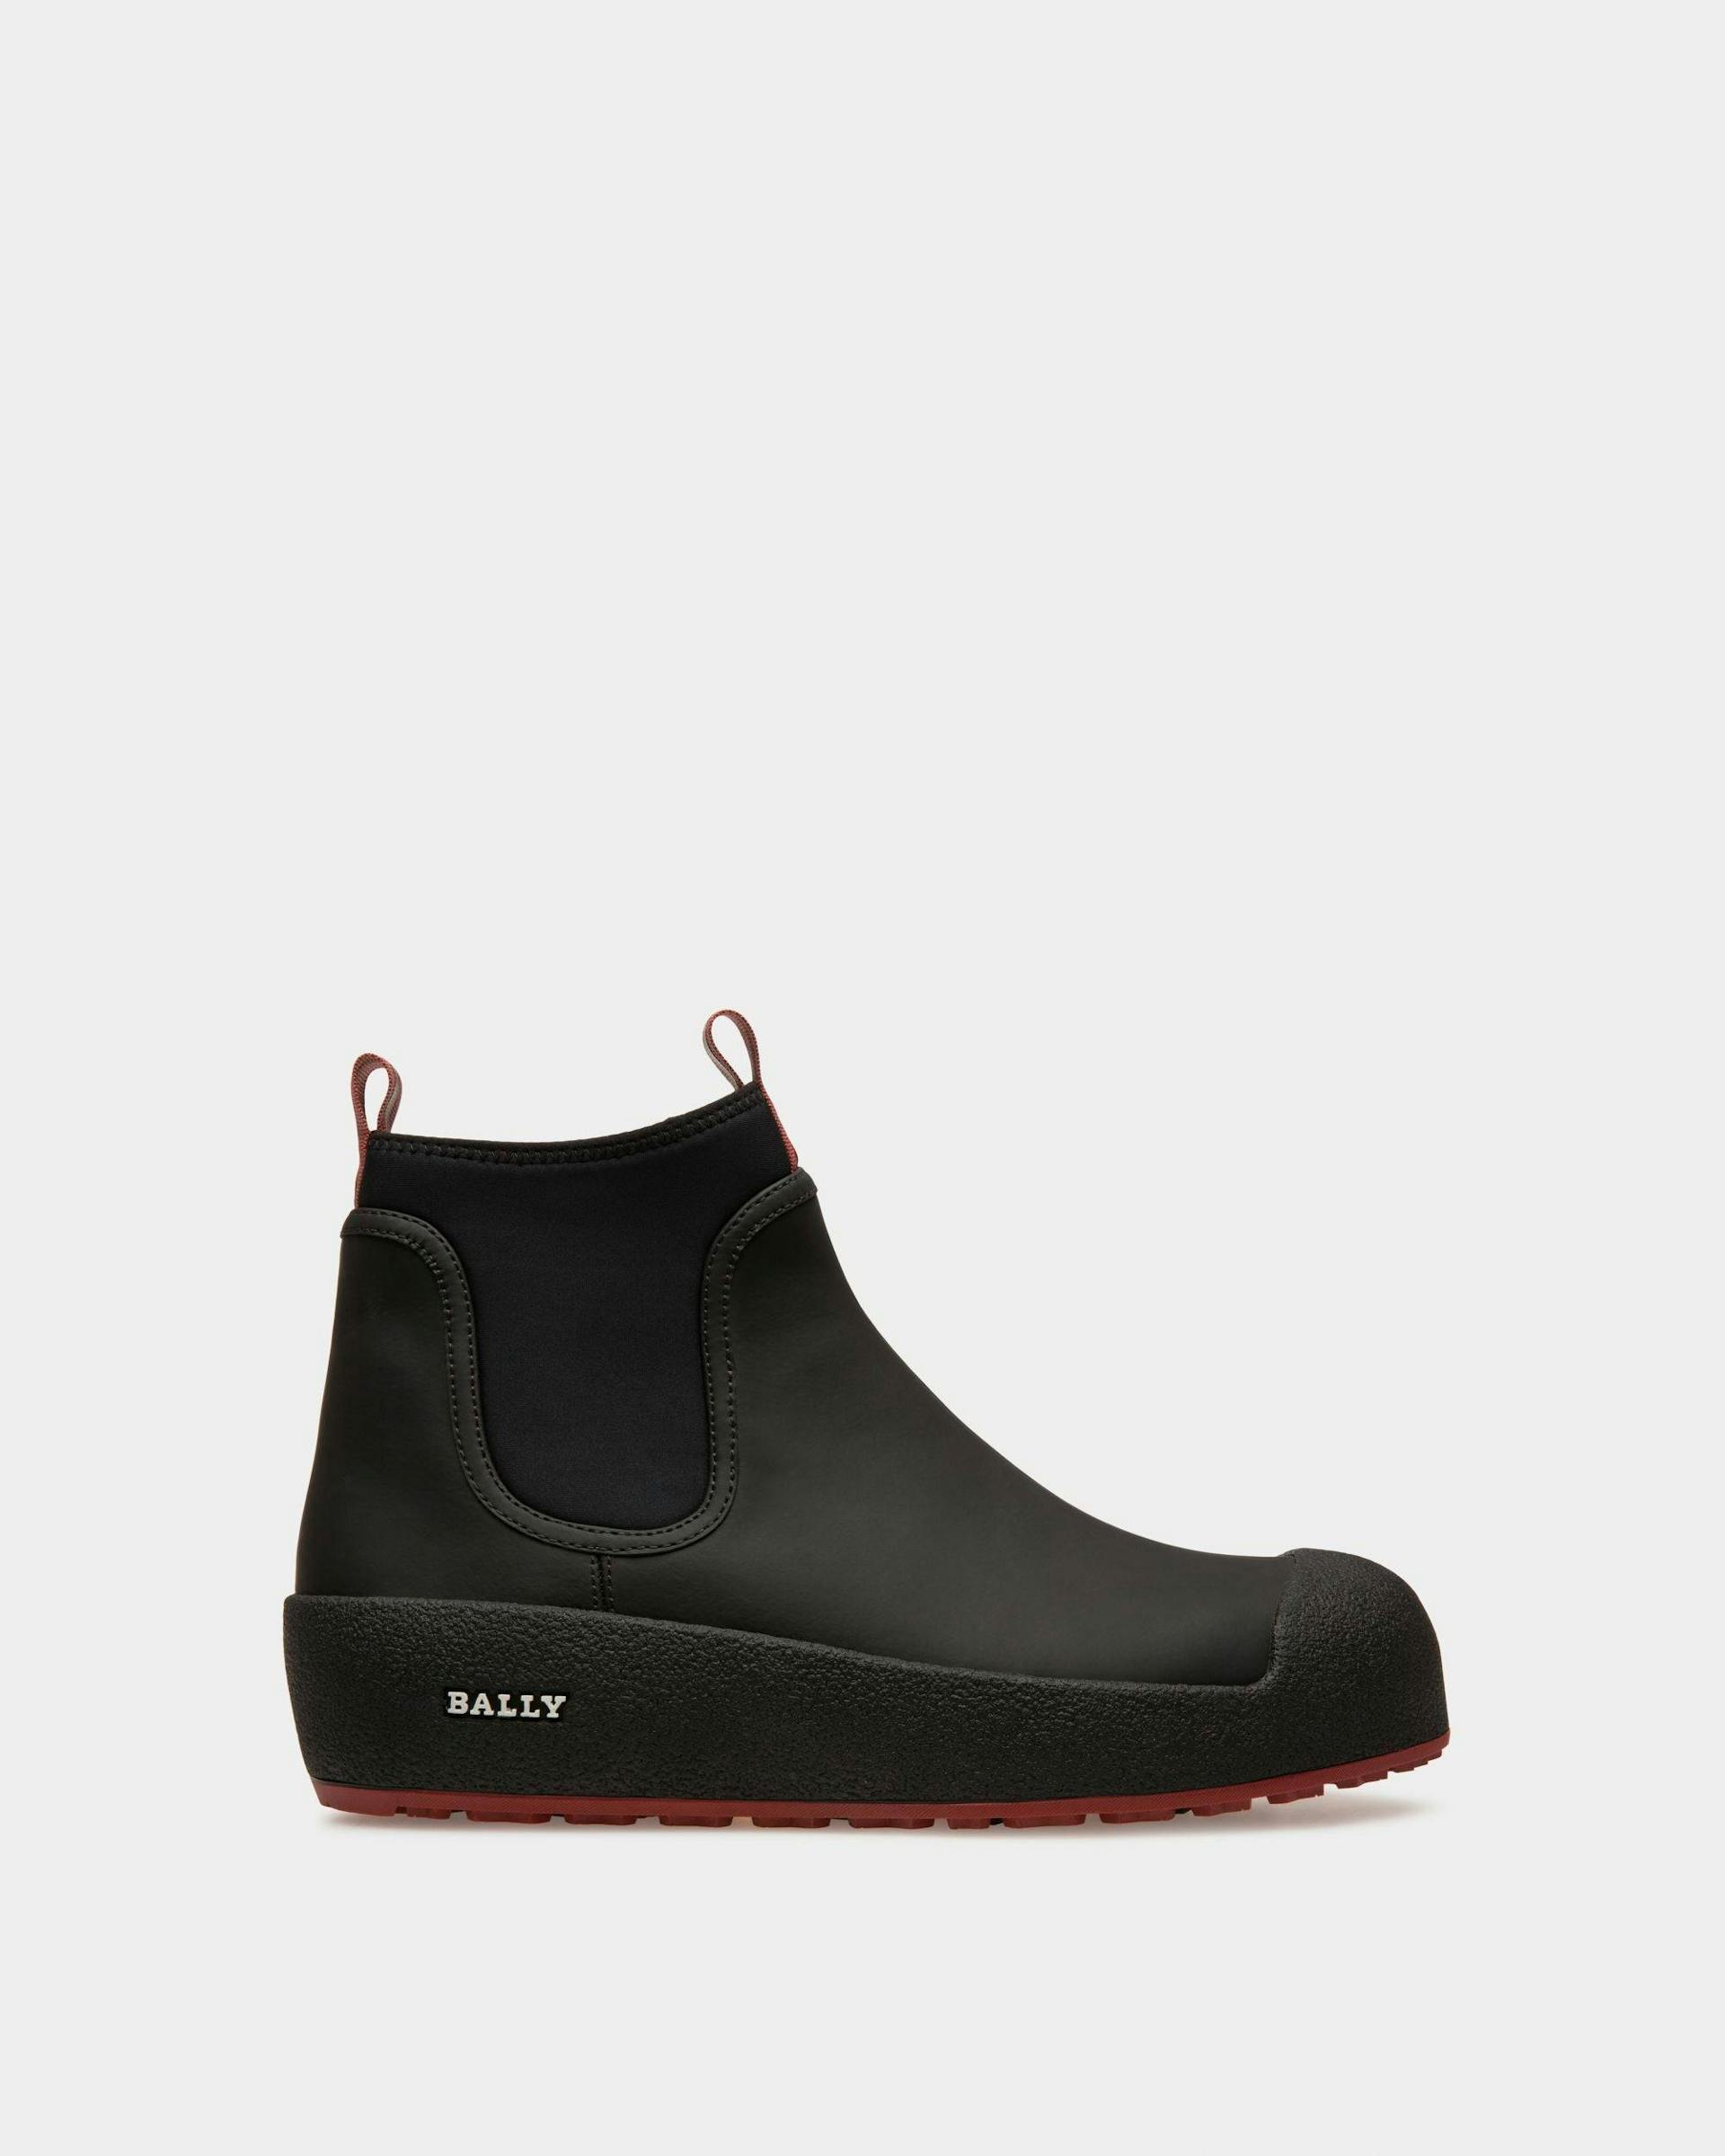 Bally Curling Booties In Black Leather - Men's - Bally - 01